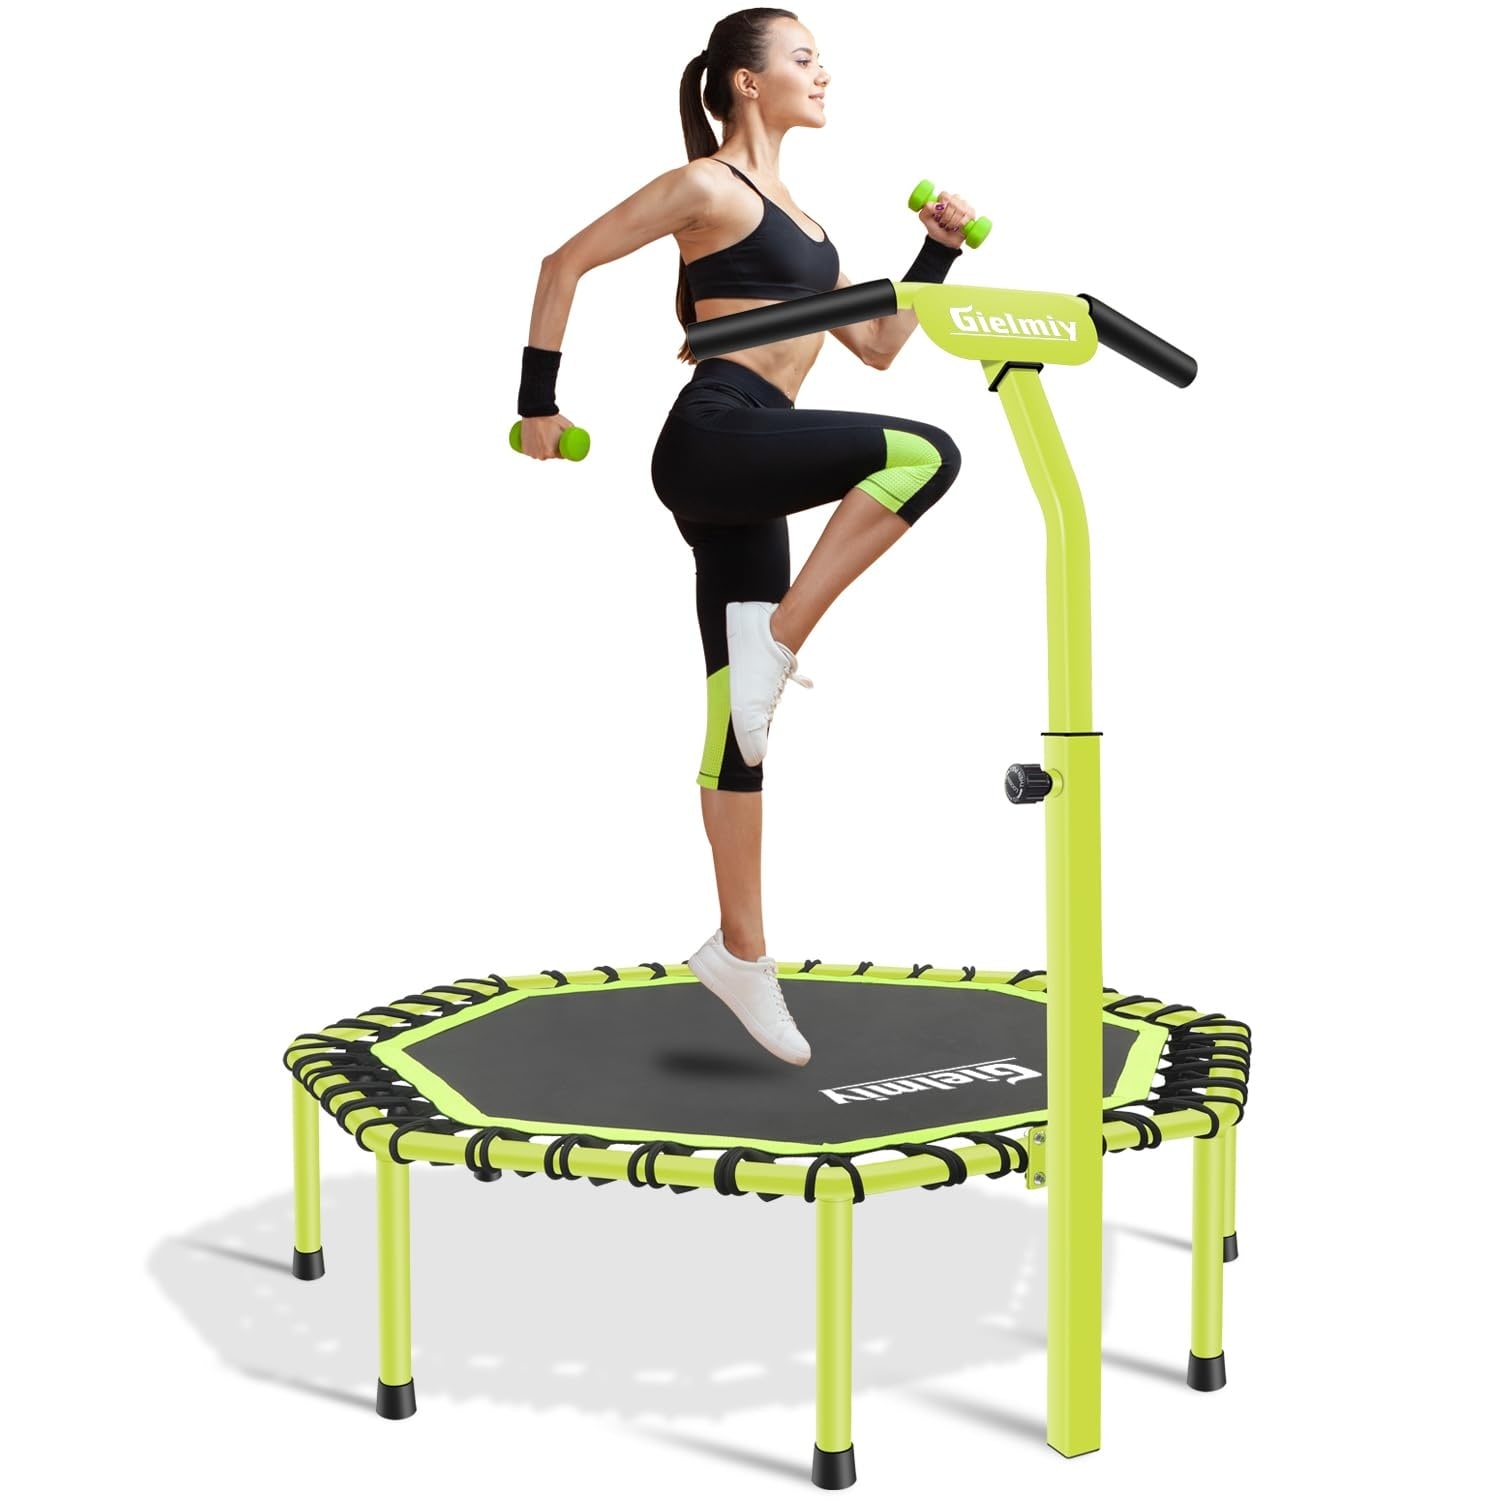 40 Mini Trampoline,Silent Fitness Trampoline，Indoor Small Bungee